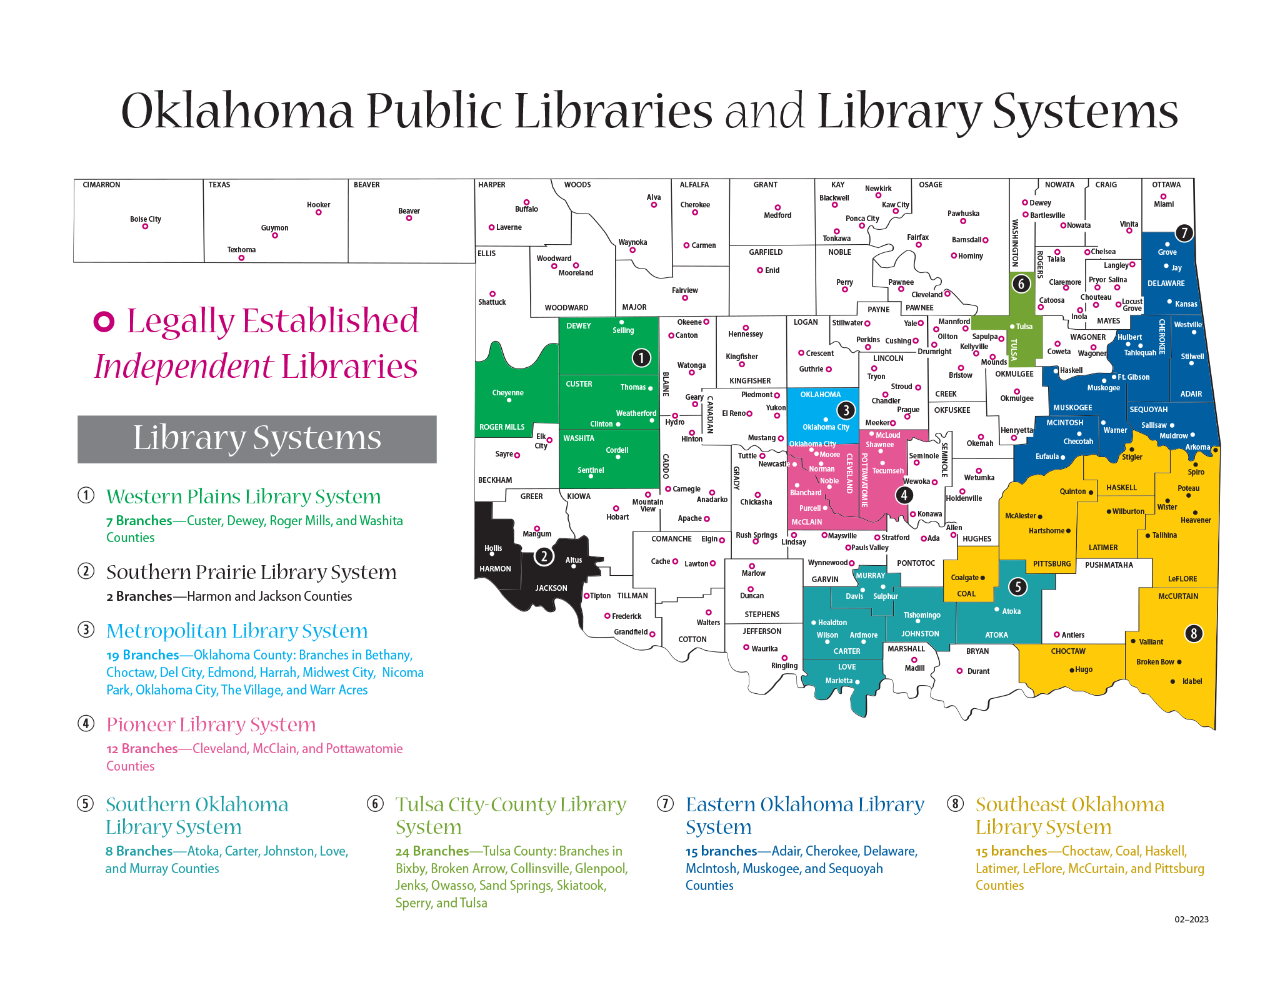 Libraries and Library Systems